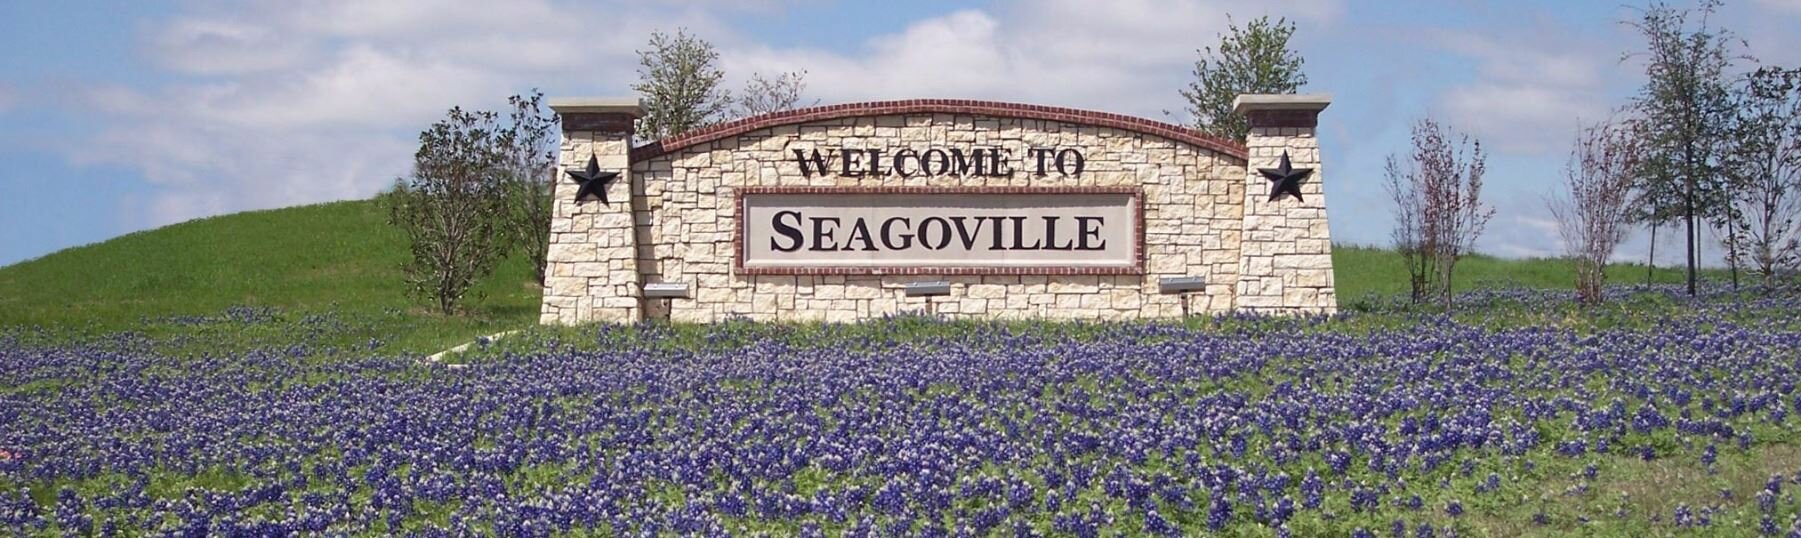 Sell My House Fast Seagoville